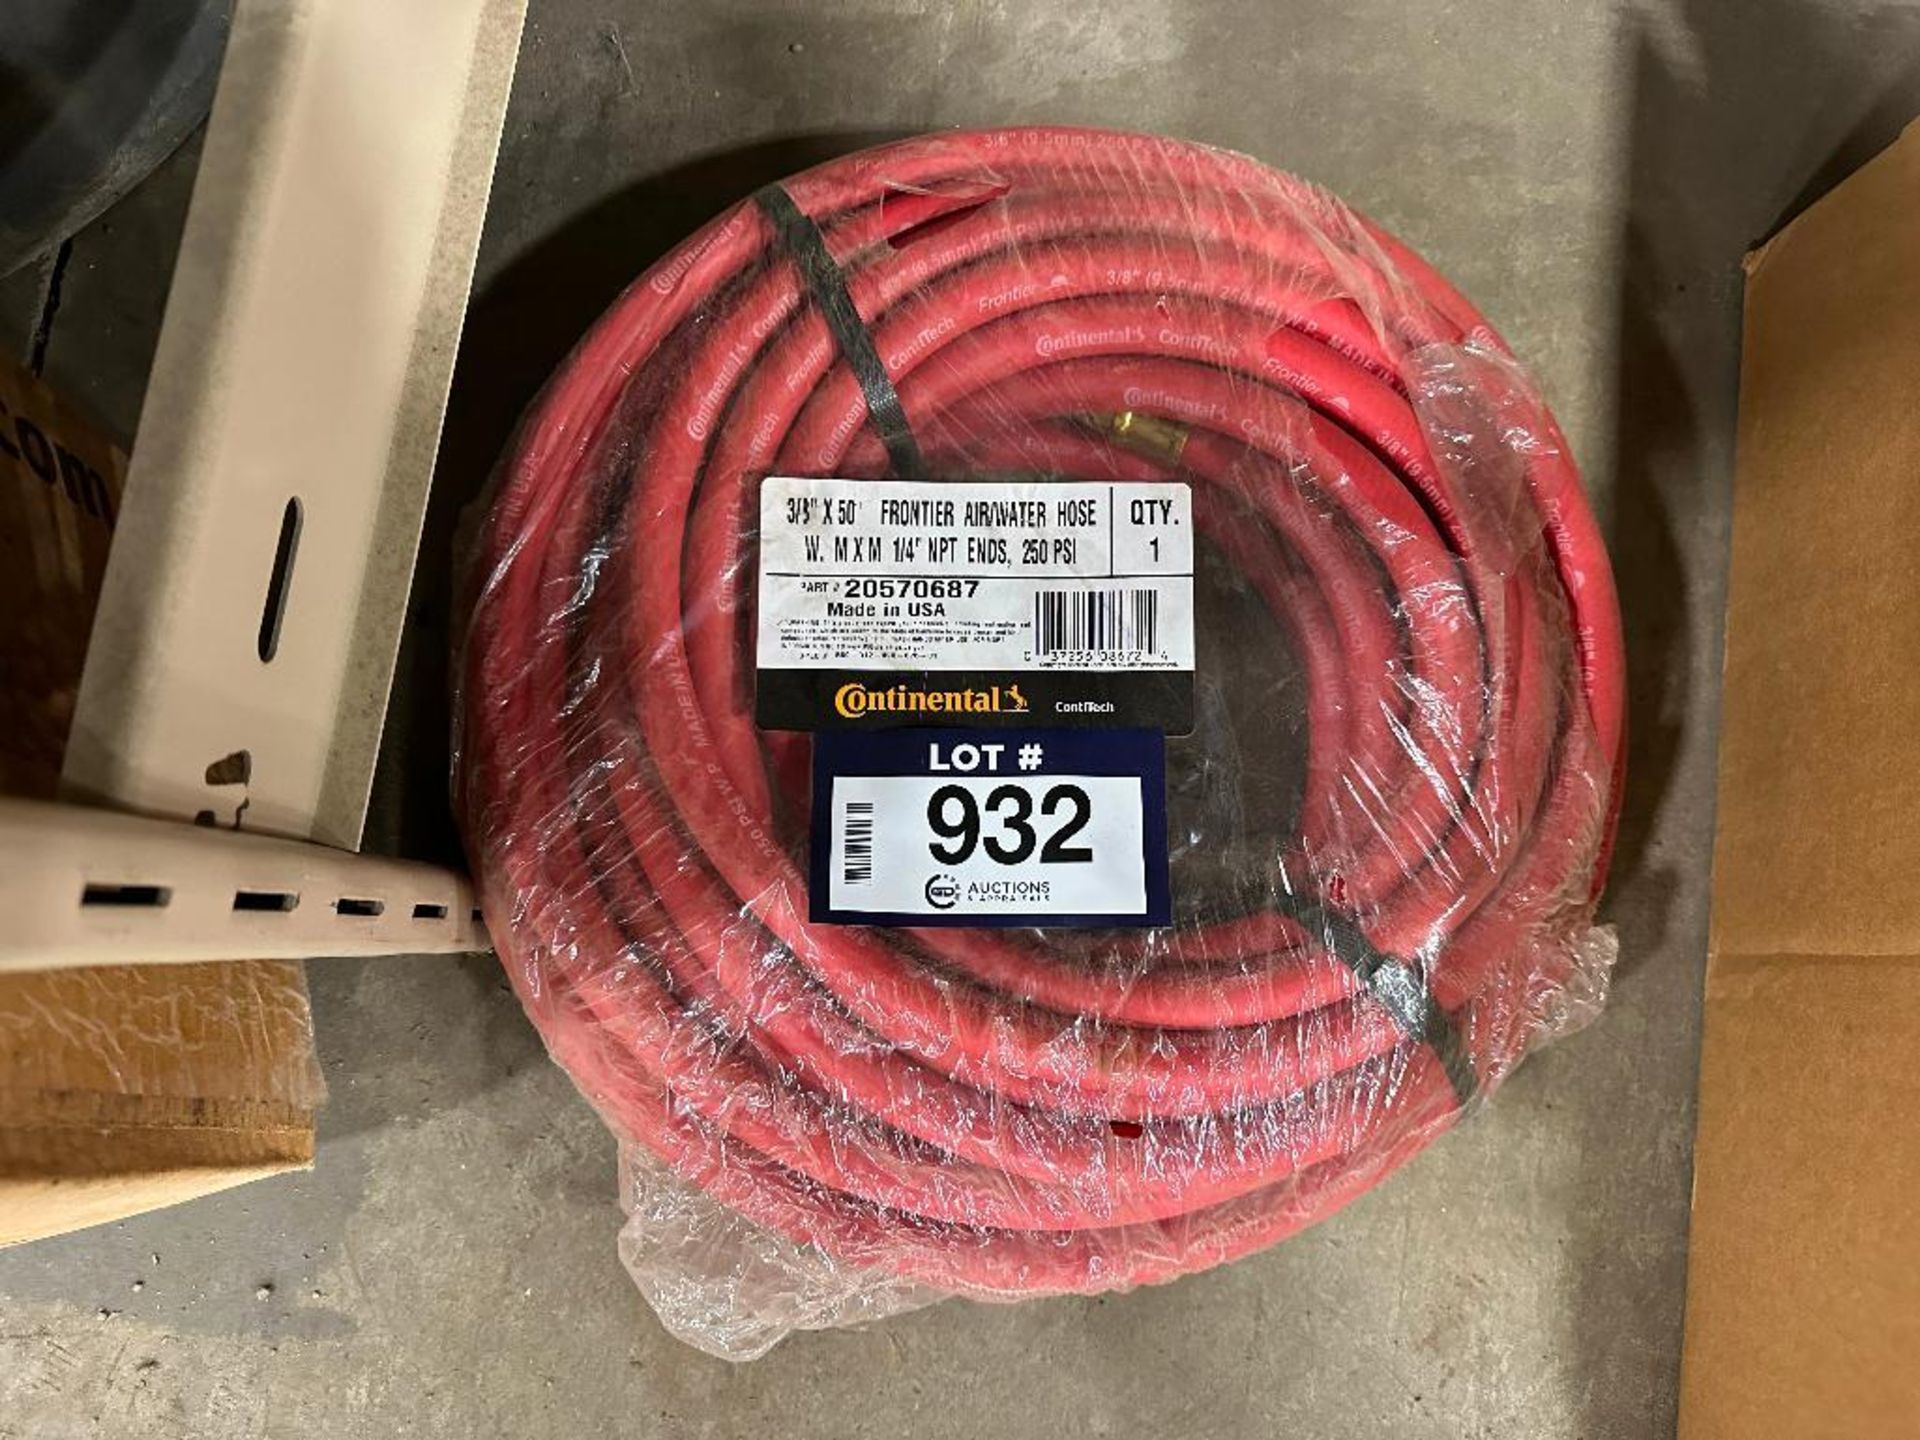 Continental 3/8” X50’ Frontier Air/Water Hose - Image 2 of 3